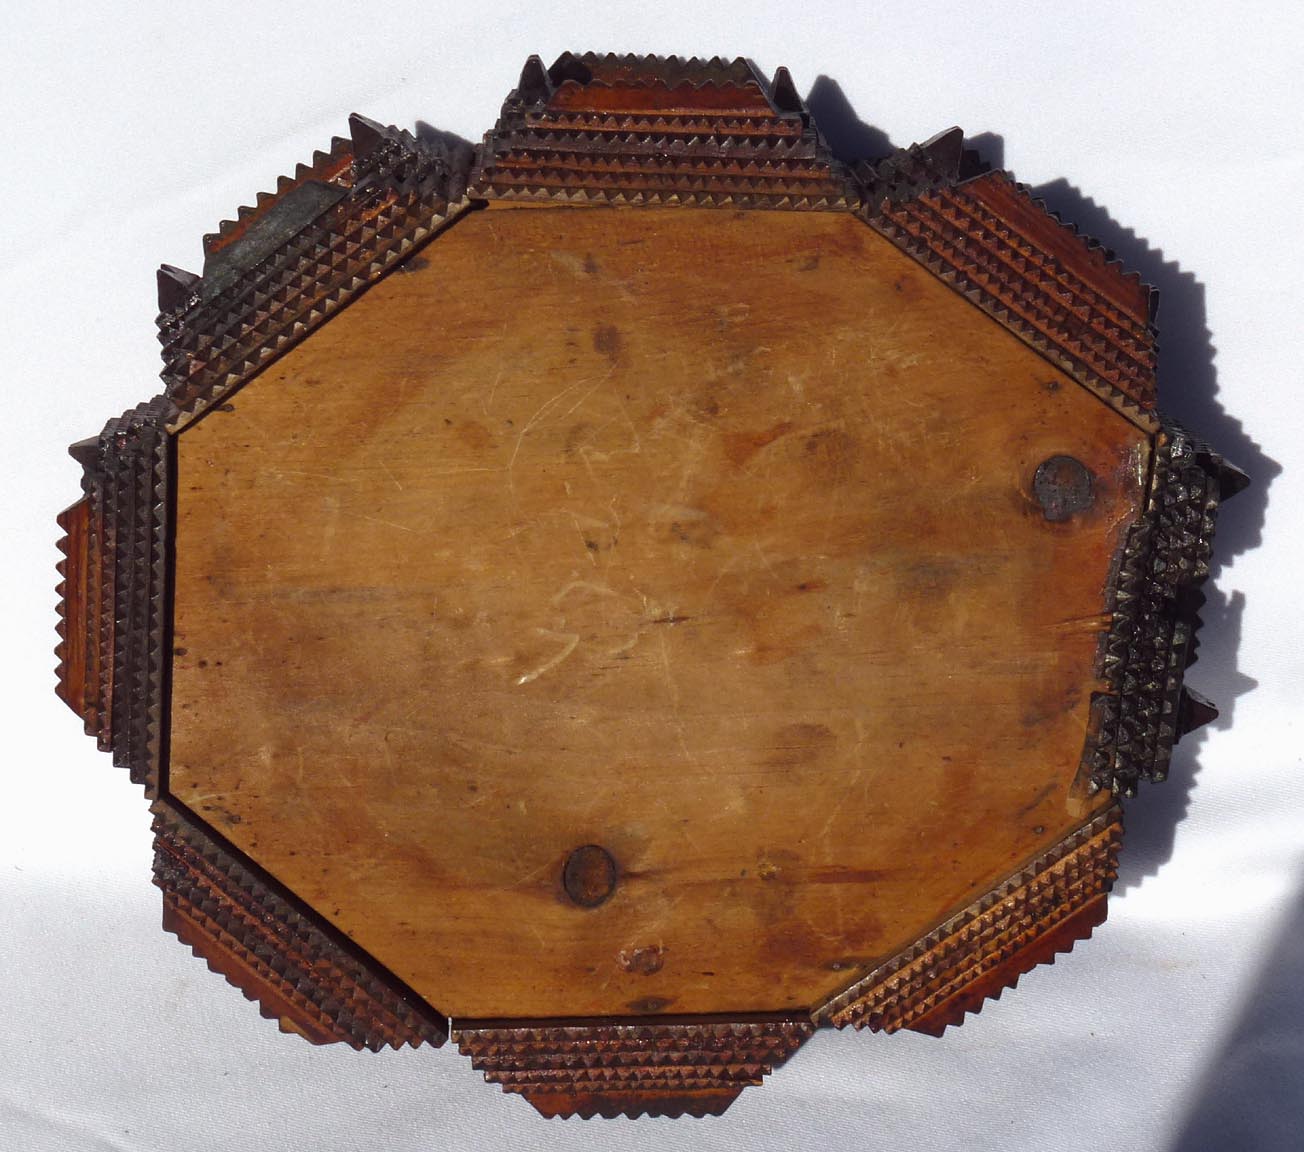 Octagonal tramp art box with leaves